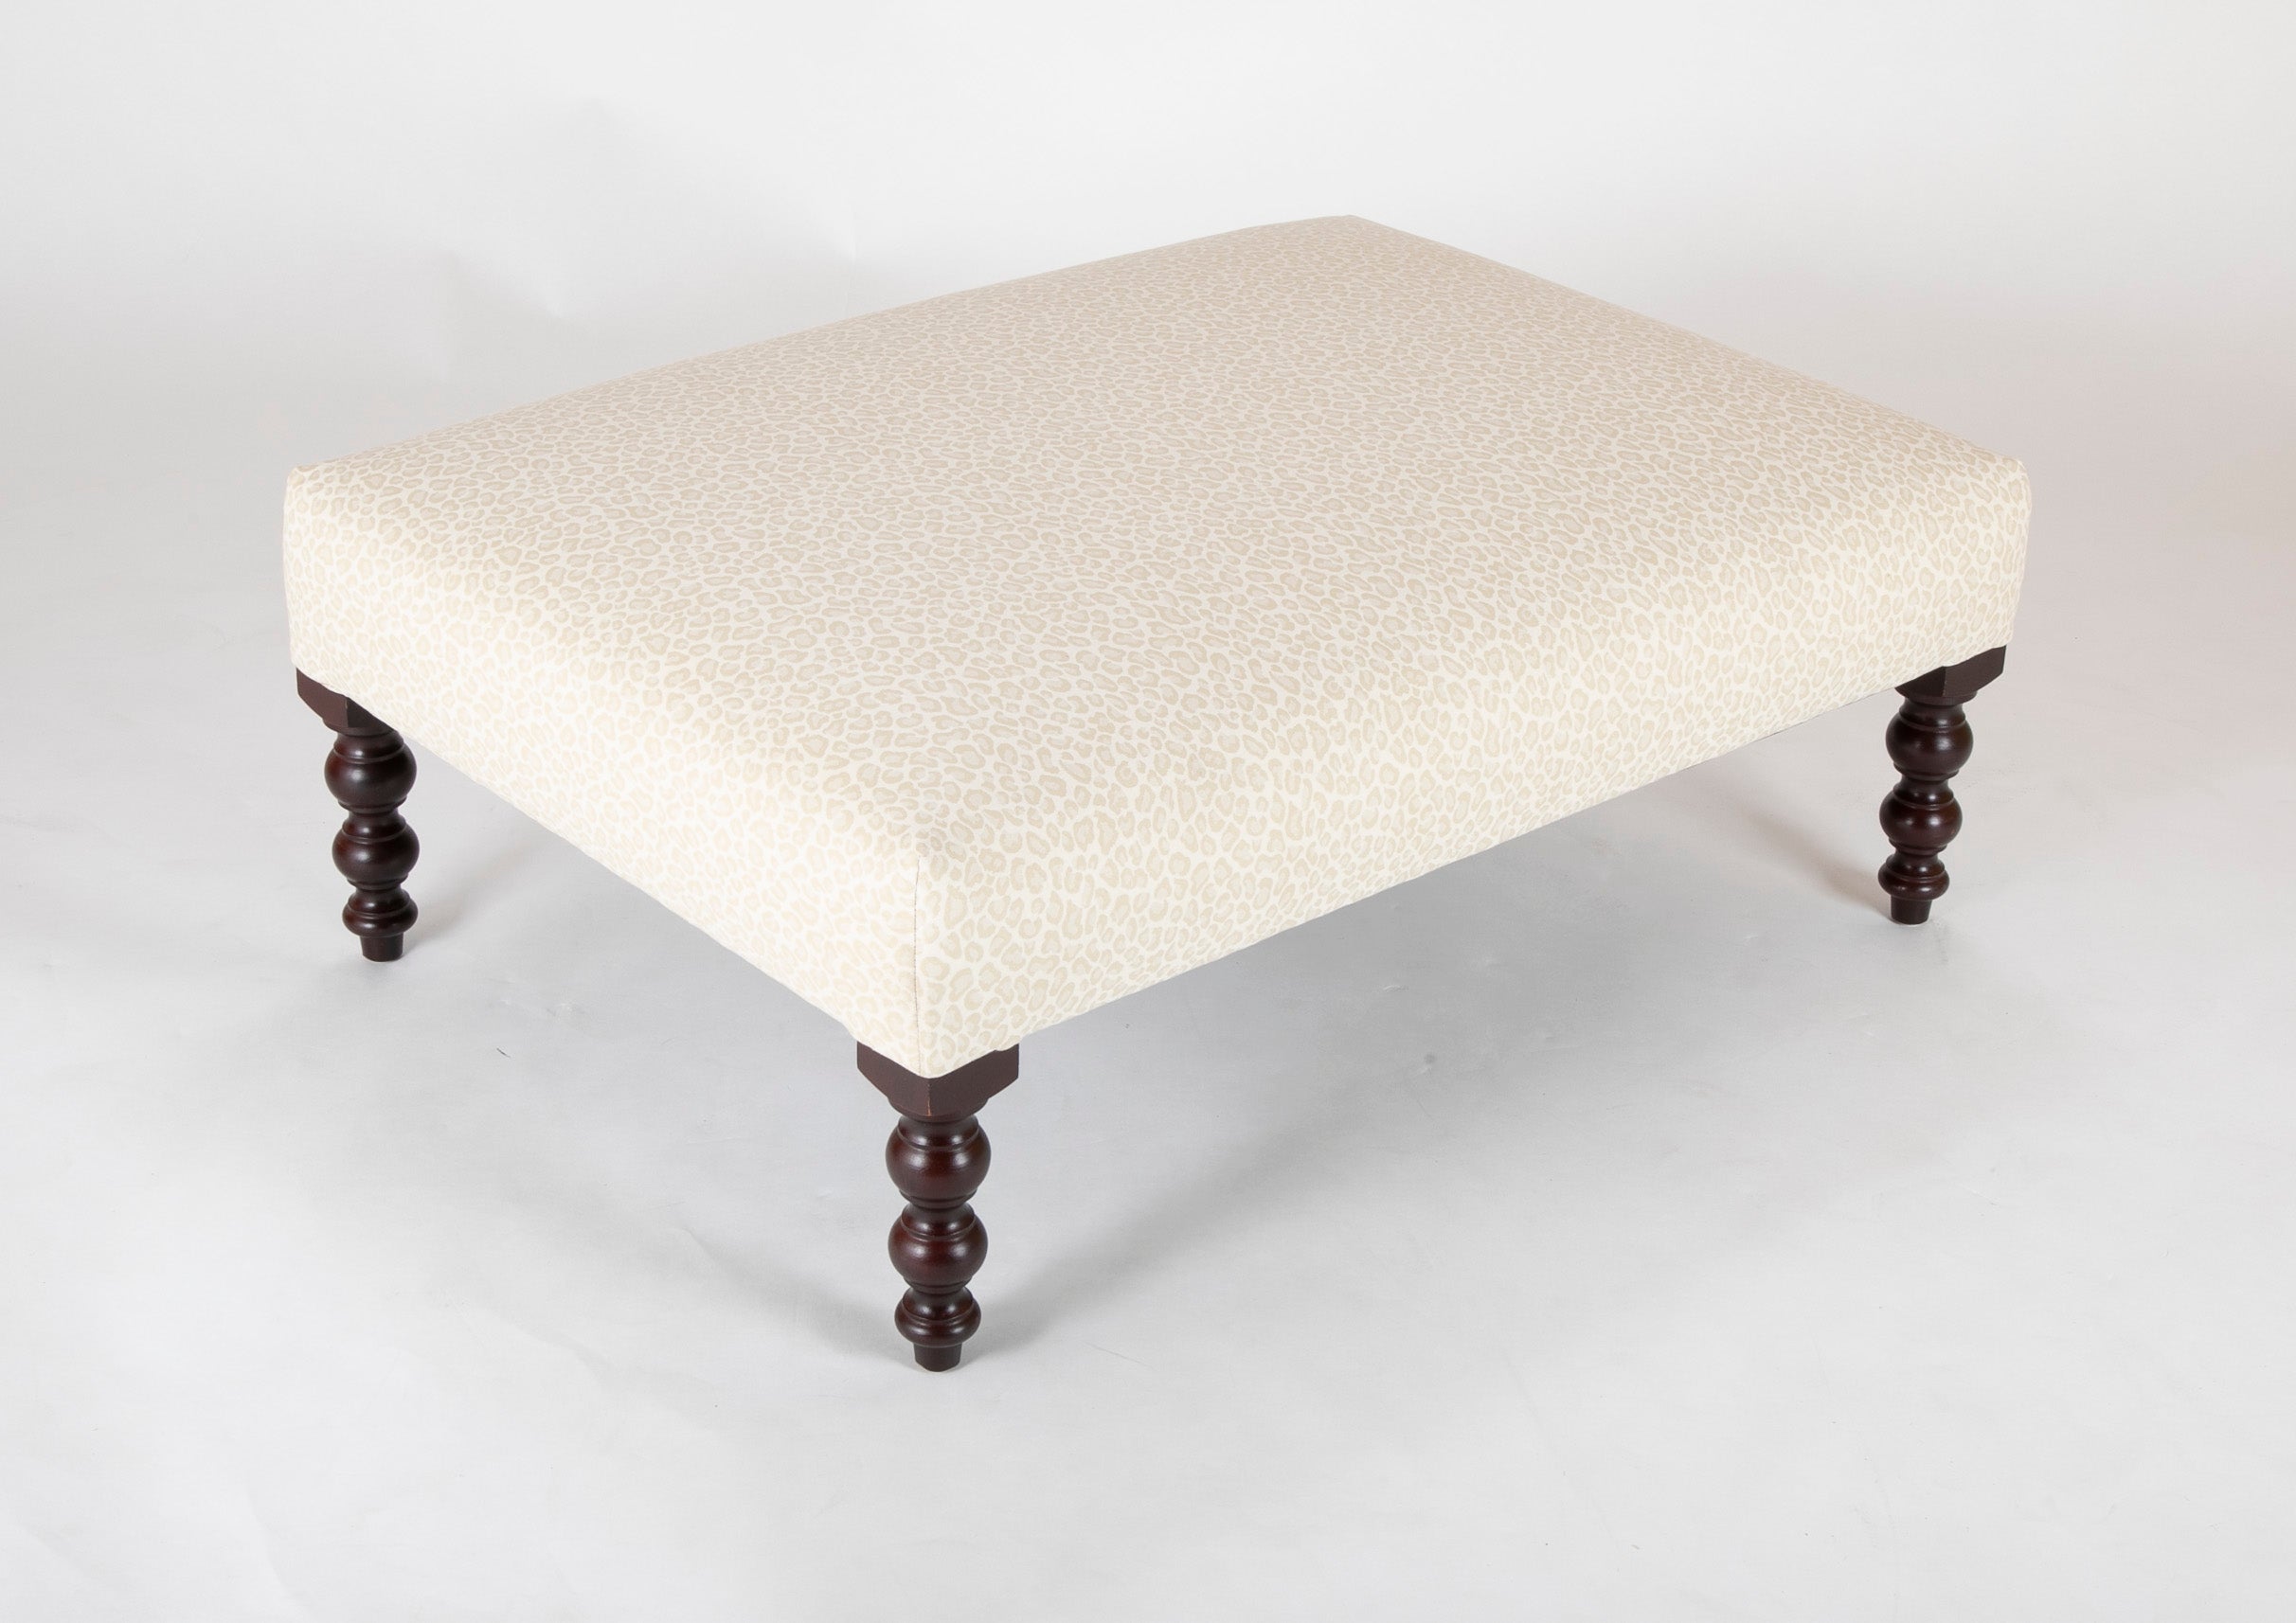 George Smith Empire Style Upholstered Ottoman